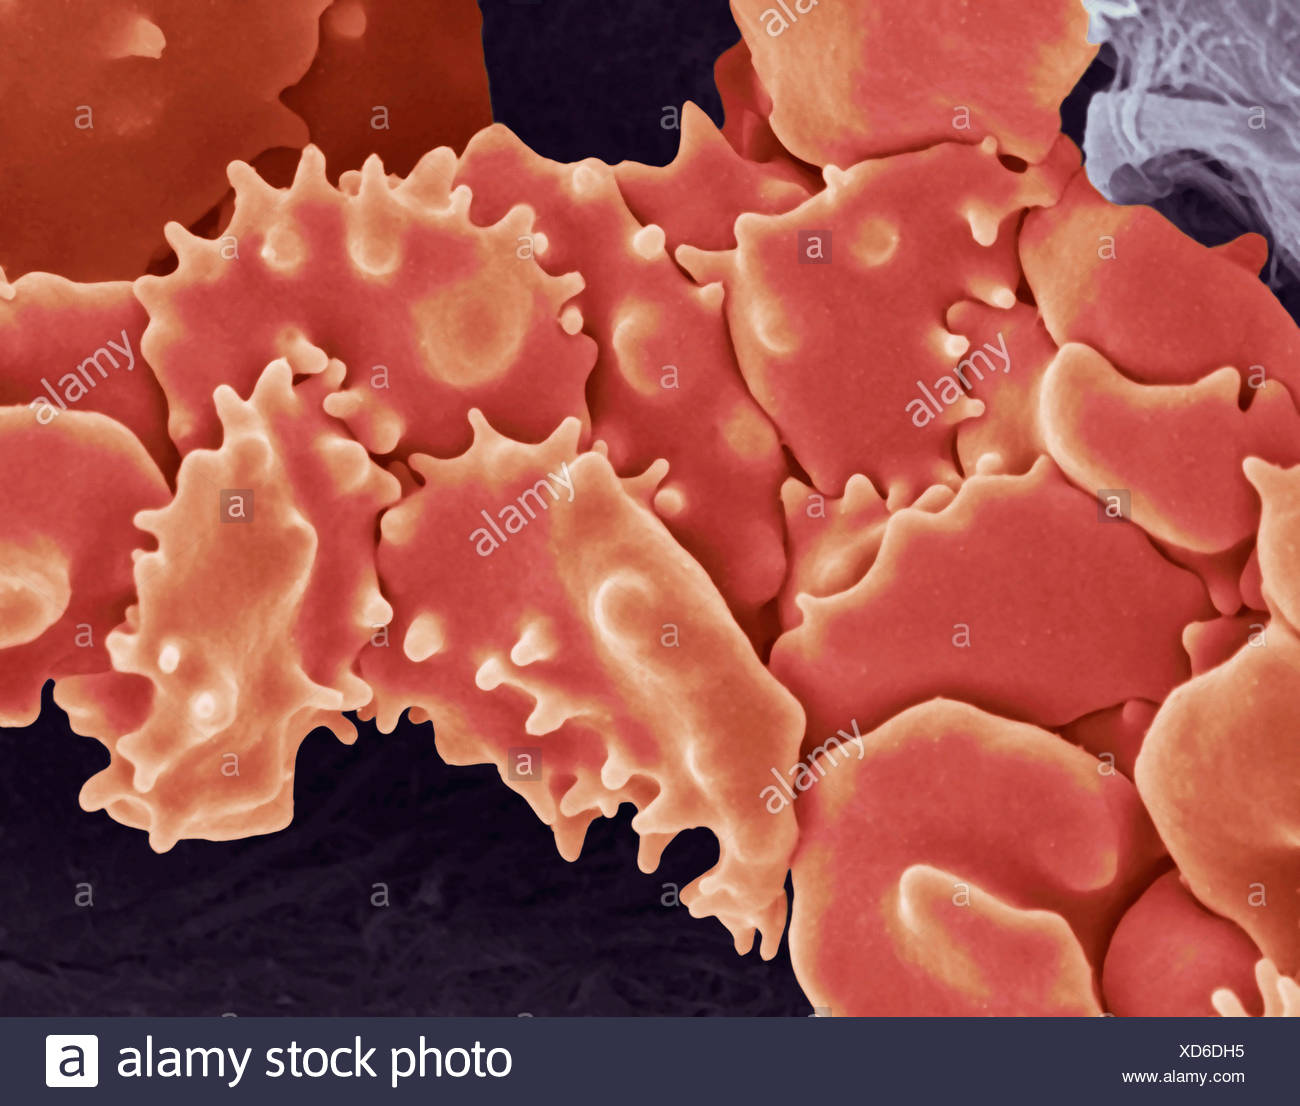 Fibrin Clot High Resolution Stock Photography and Images - Alamy